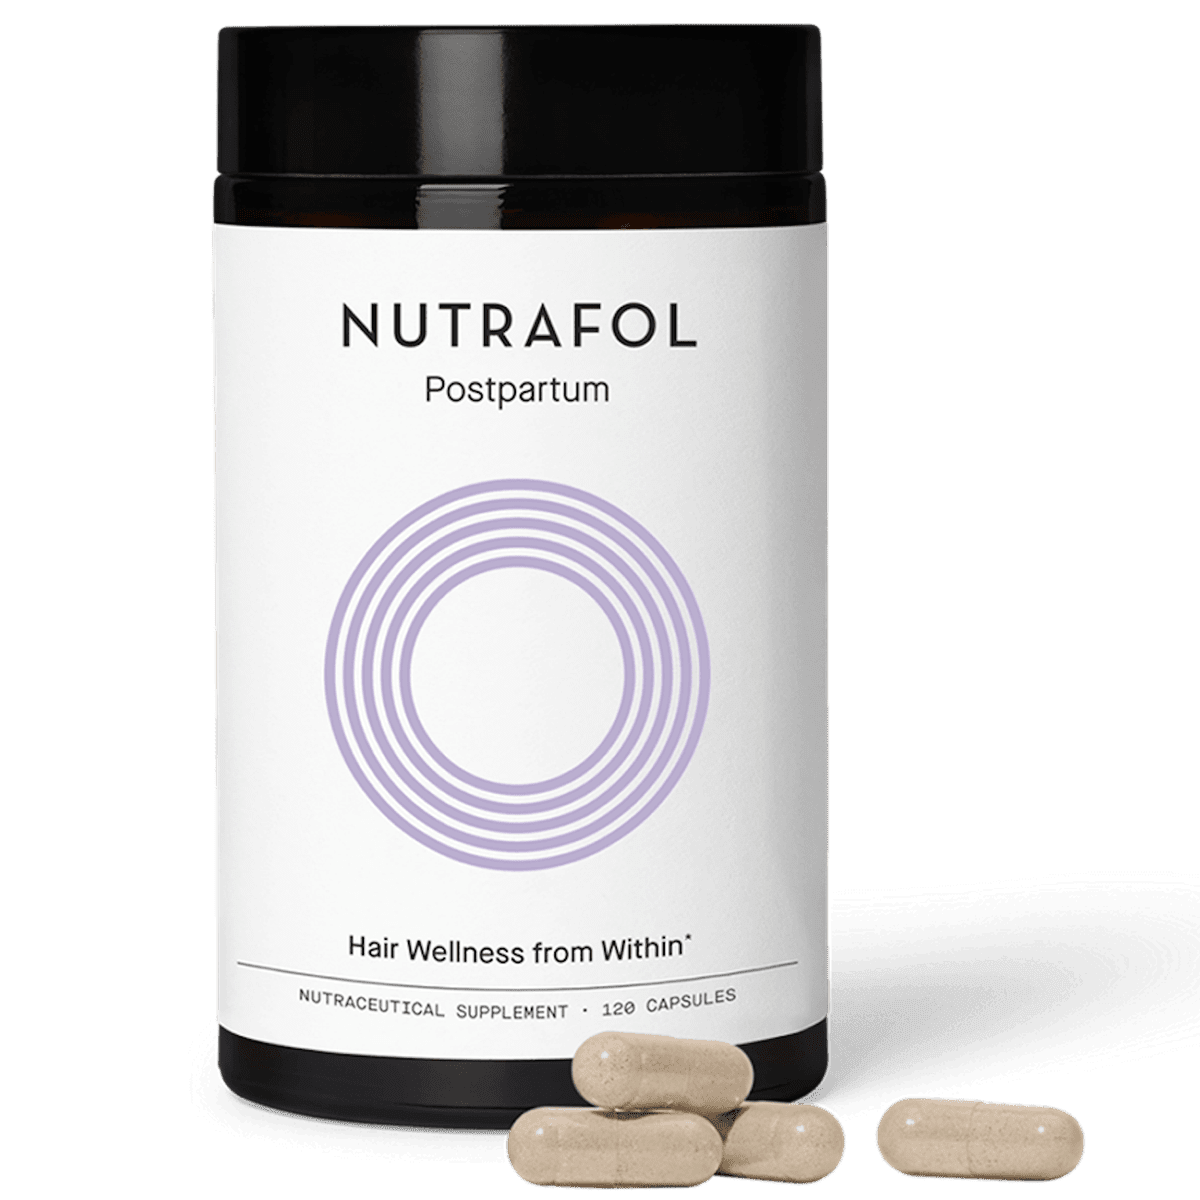 Nutrafol Expert Recommended